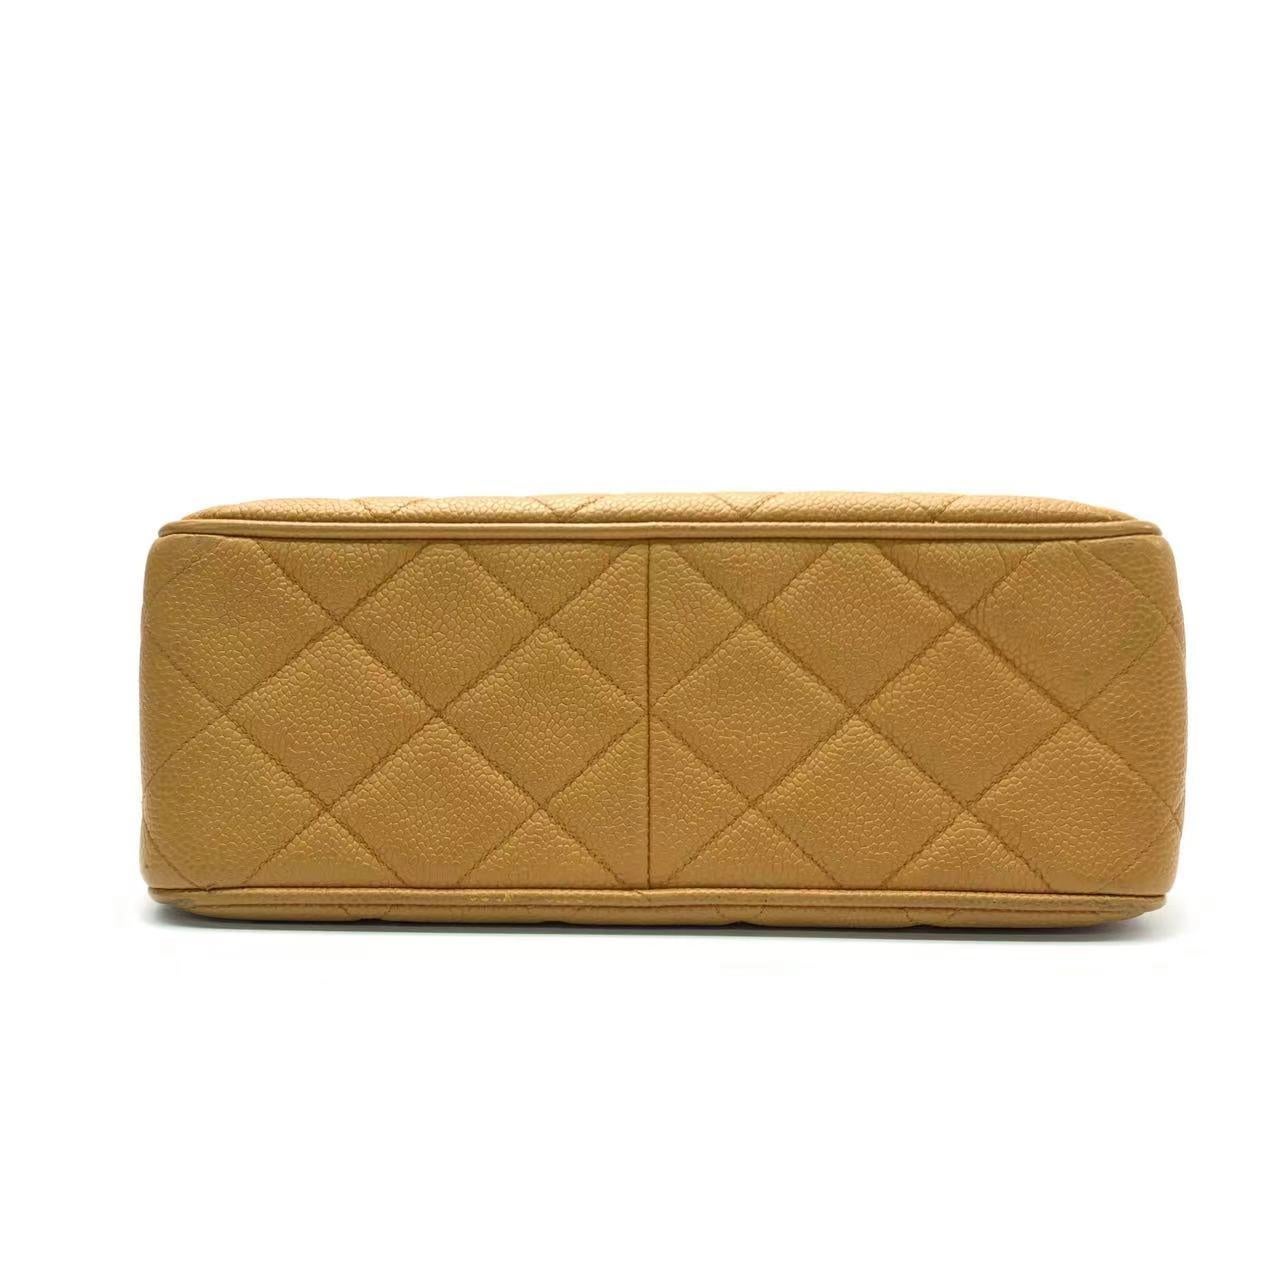 Chanel Classic Flap Vintage Camel Caviar Leather 24k Gold Plated Big CC Logo For Sale 1